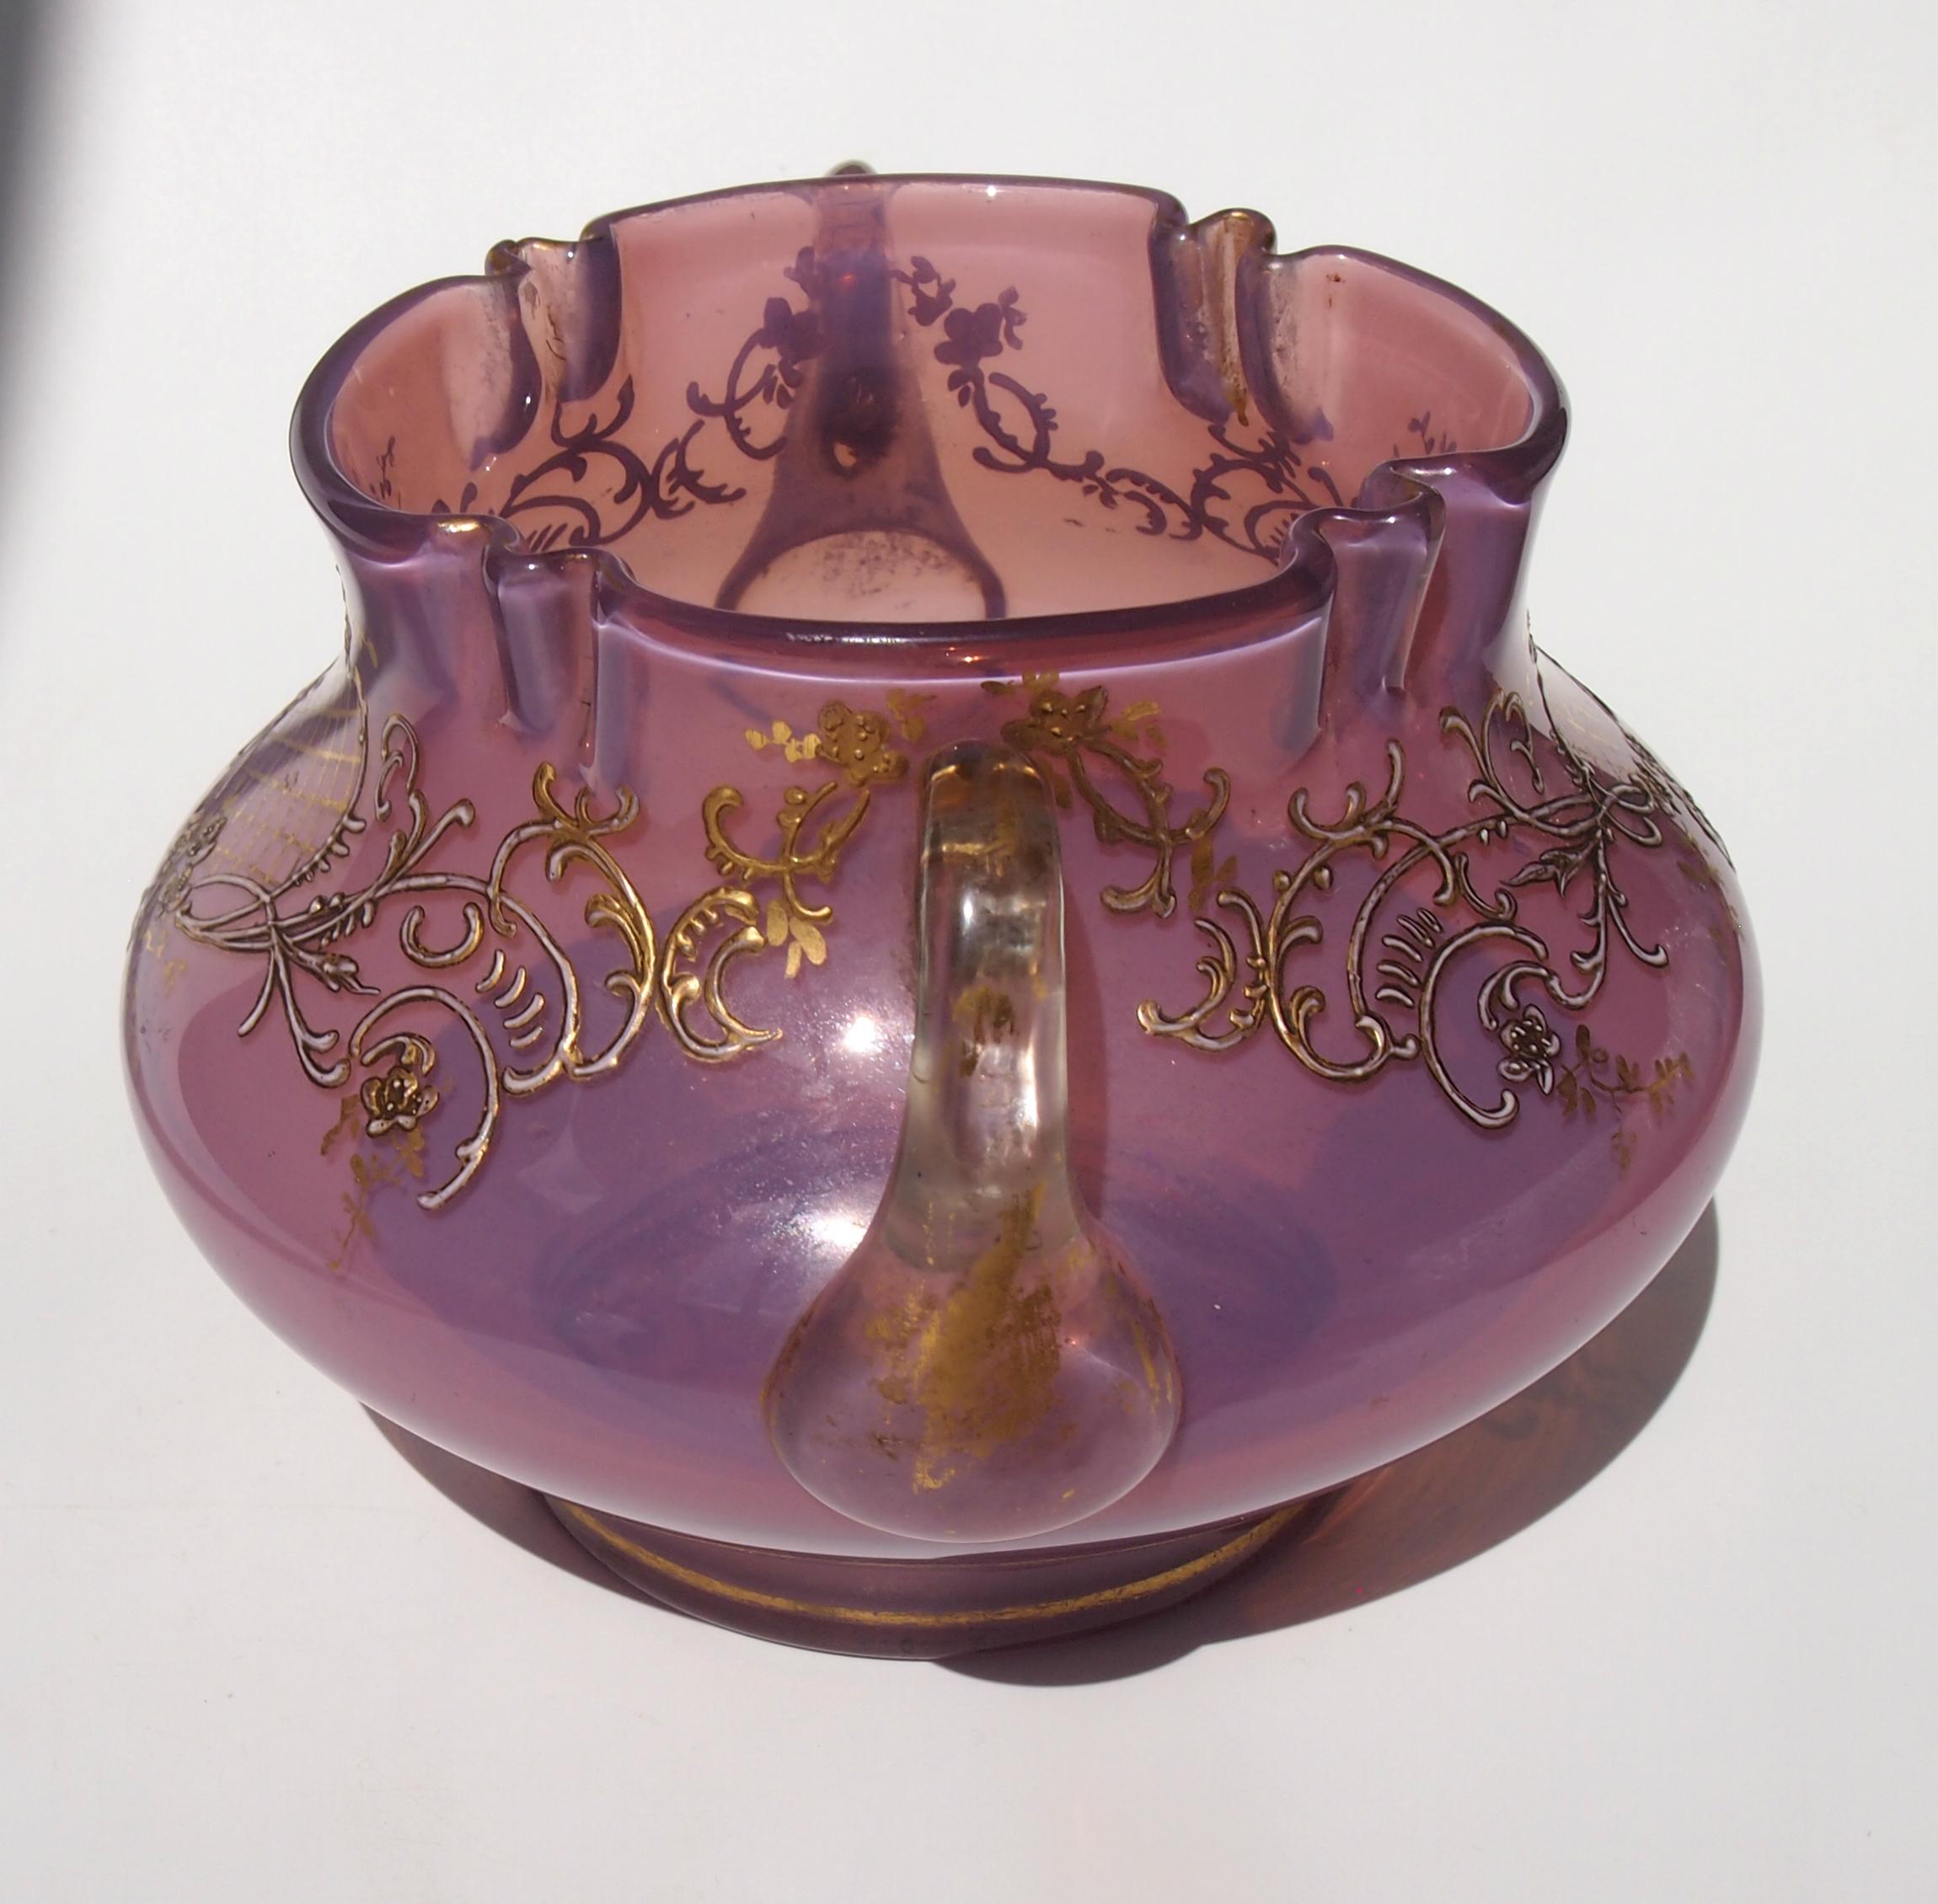 Stunning two handled vibrant pink / purple (Heliotrope) documented early Loetz vase (the shape reference is Series I PN 500), This is a very early Loetz decoration and a beautiful vibrant colour - it is gilded and enamelled with one of the Classic